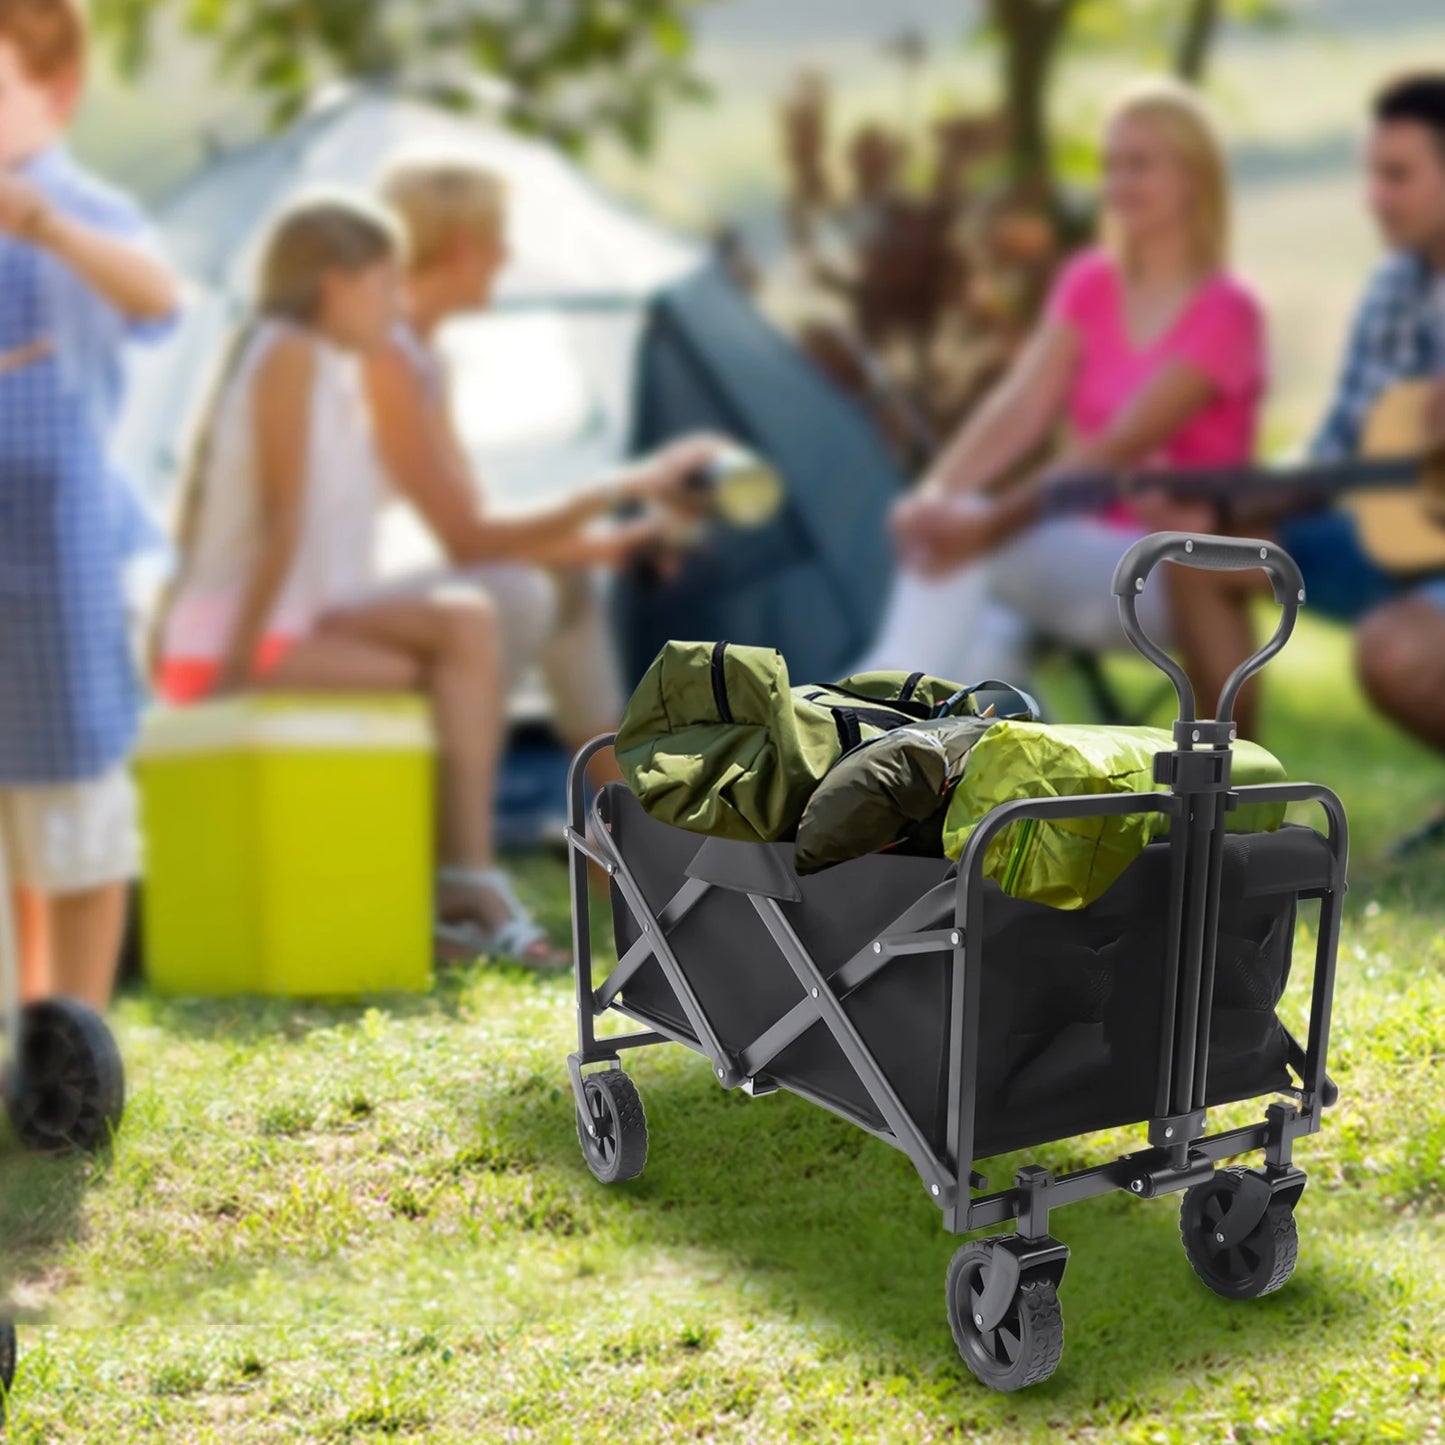 Collapsible Outdoor Wagon Cart Folding Camping Cart Garden Tool Utility Camping Sturdy Wagon